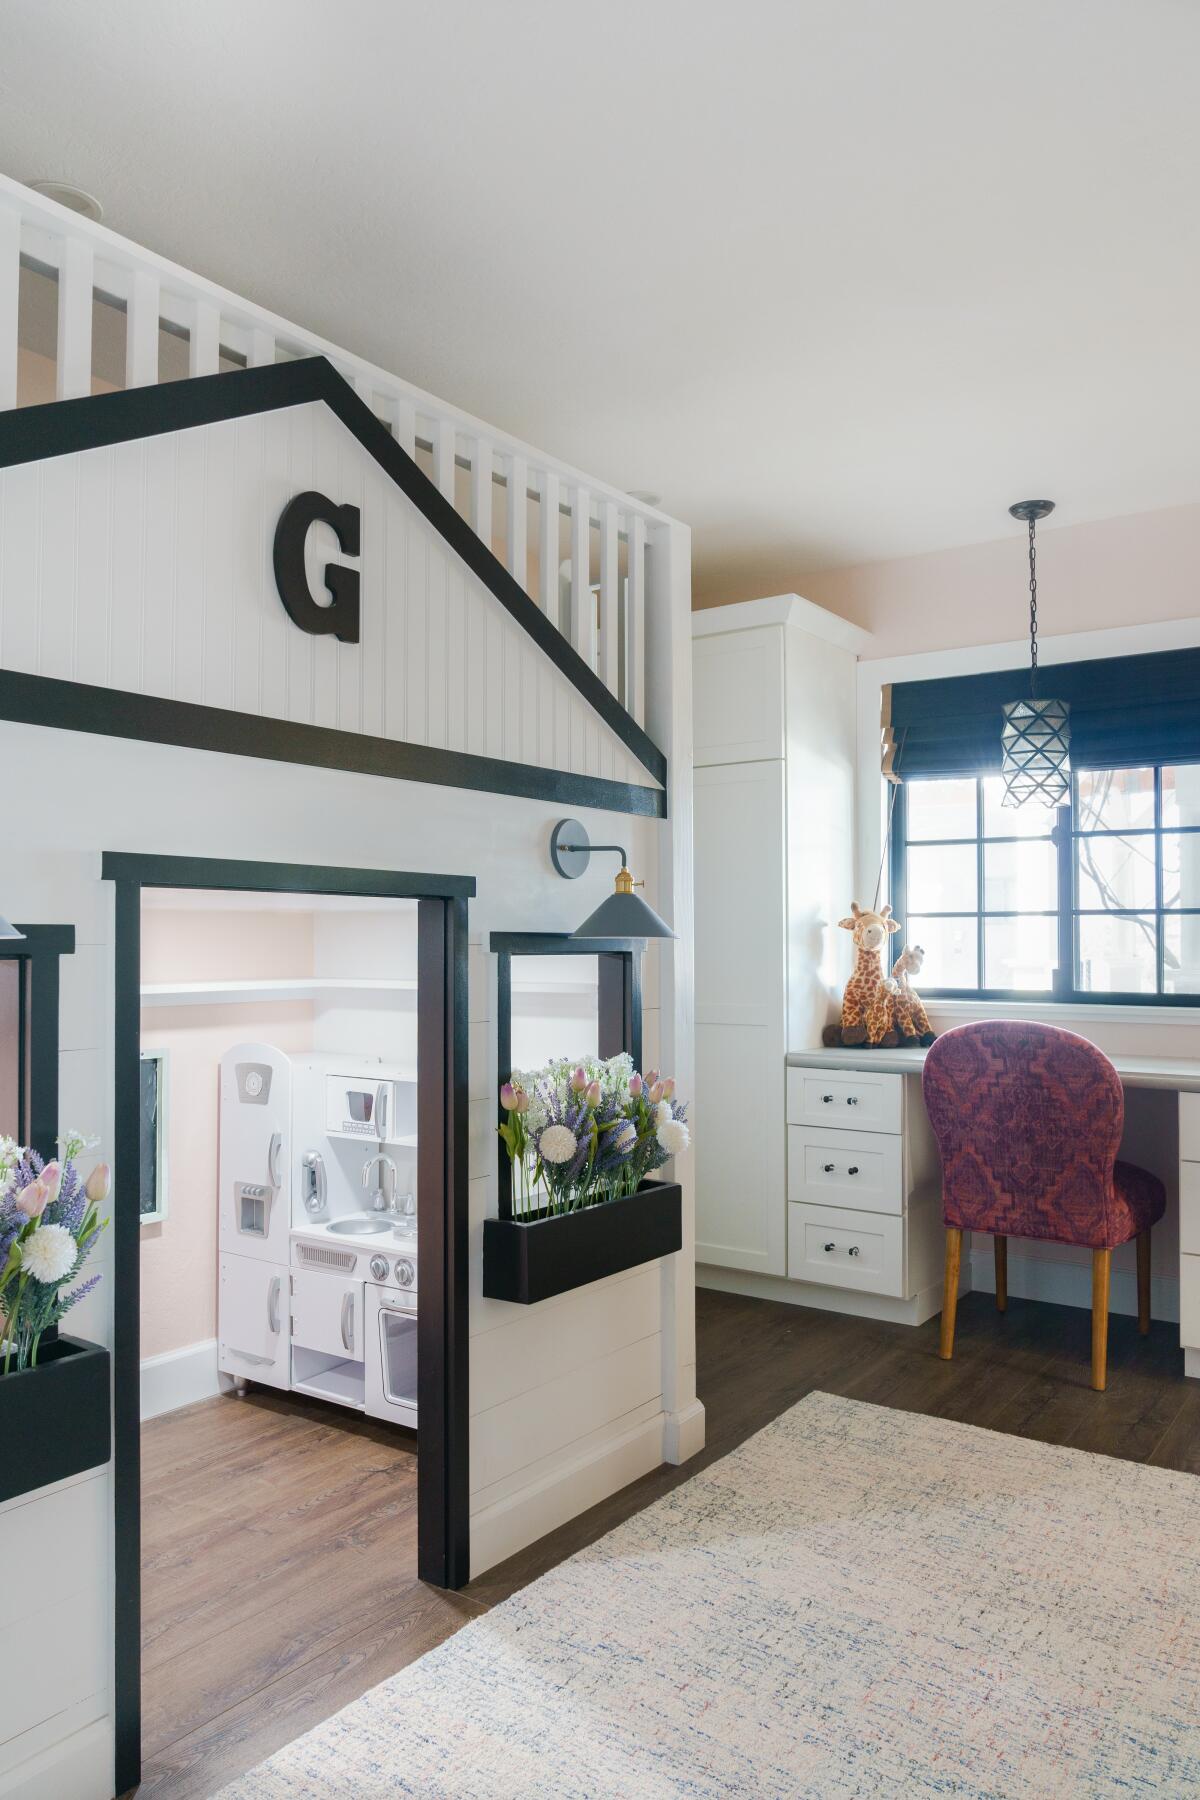 A "farmhouse luxe" girls room, complete with window boxes and a playhouse.